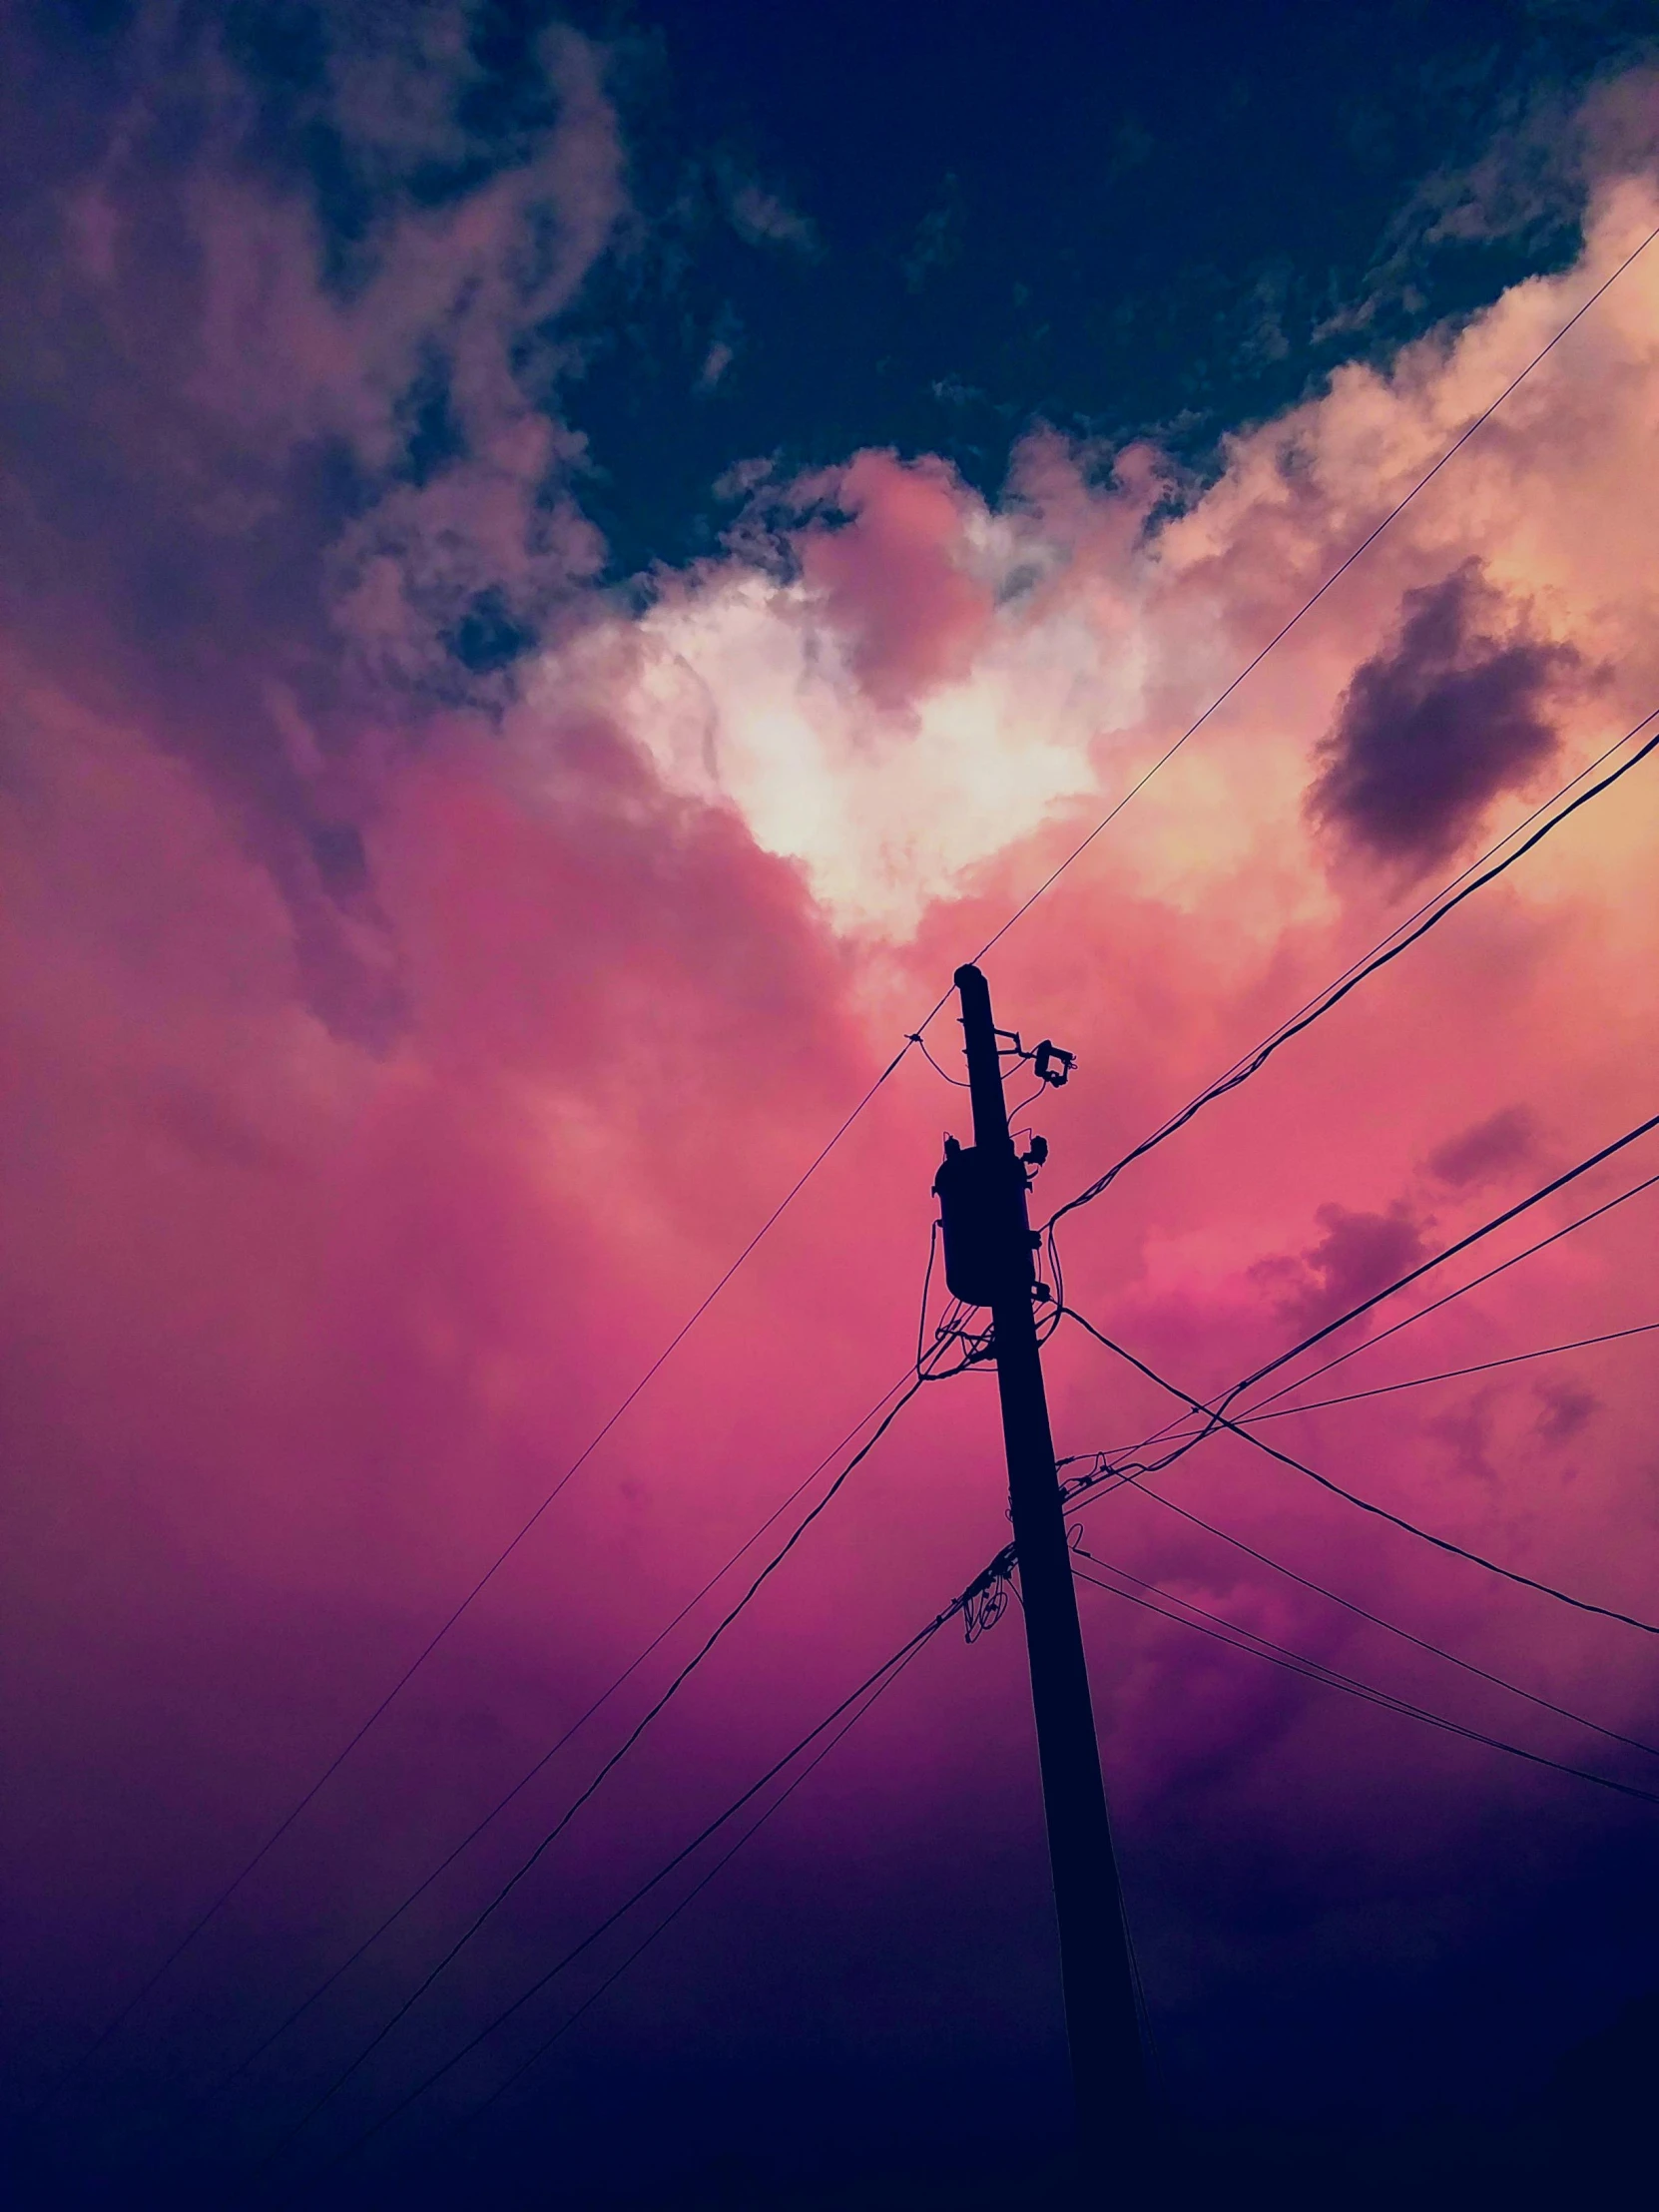 a telephone pole with a cloudy sky in the background, an album cover, inspired by Elsa Bleda, unsplash, aestheticism, ((pink)), ☁🌪🌙👩🏾, with beautiful colors, ) ominous vibes